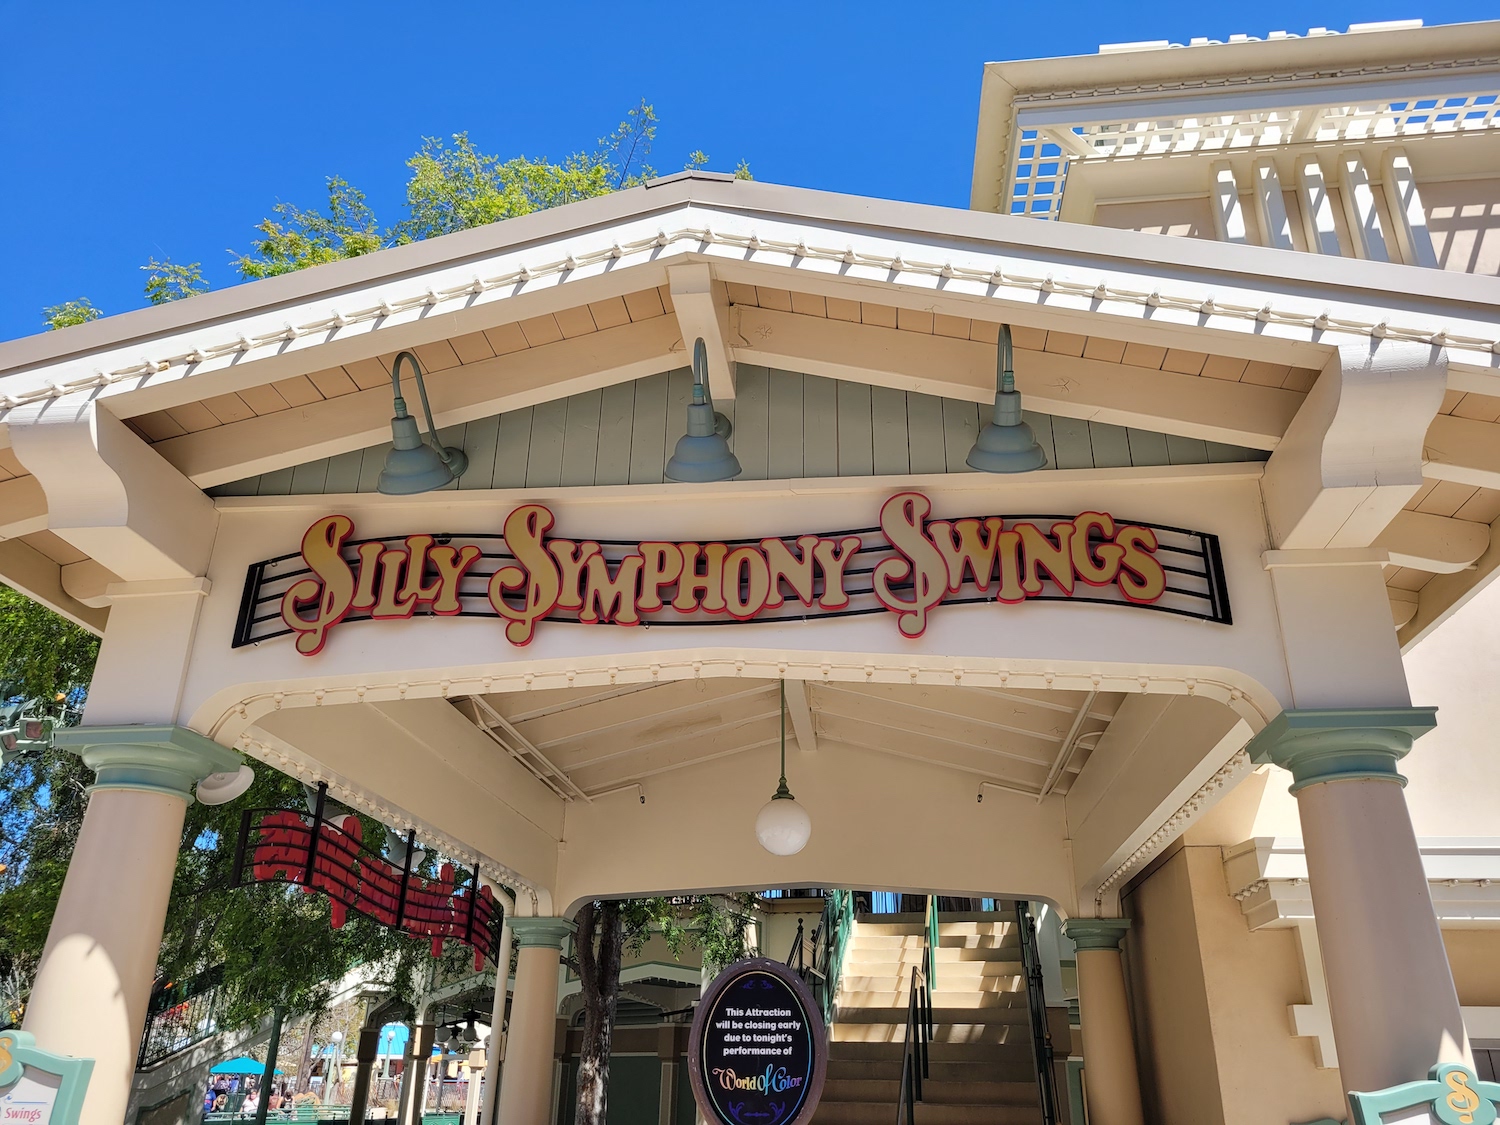 Silly Symphony Swings Sign